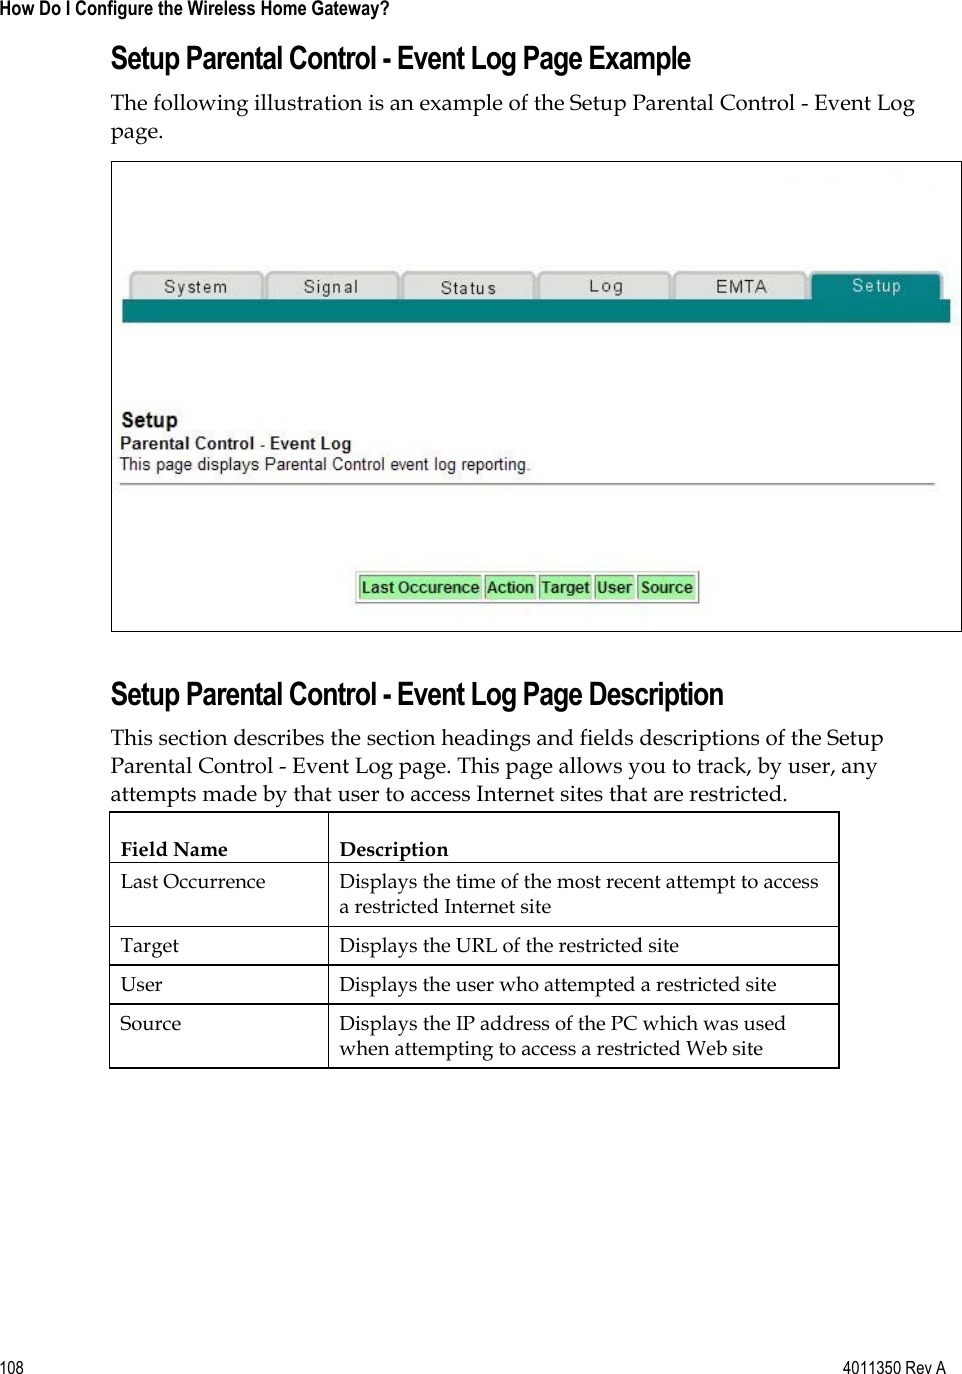 108    4011350 Rev A How Do I Configure the Wireless Home Gateway? Setup Parental Control - Event Log Page Example The following illustration is an example of the Setup Parental Control - Event Log page.Setup Parental Control - Event Log Page DescriptionThis section describes the section headings and fields descriptions of the Setup Parental Control - Event Log page. This page allows you to track, by user, any attempts made by that user to access Internet sites that are restricted. Field Name  Description Last Occurrence  Displays the time of the most recent attempt to access a restricted Internet site Target  Displays the URL of the restricted site User  Displays the user who attempted a restricted site Source  Displays the IP address of the PC which was used when attempting to access a restricted Web site 